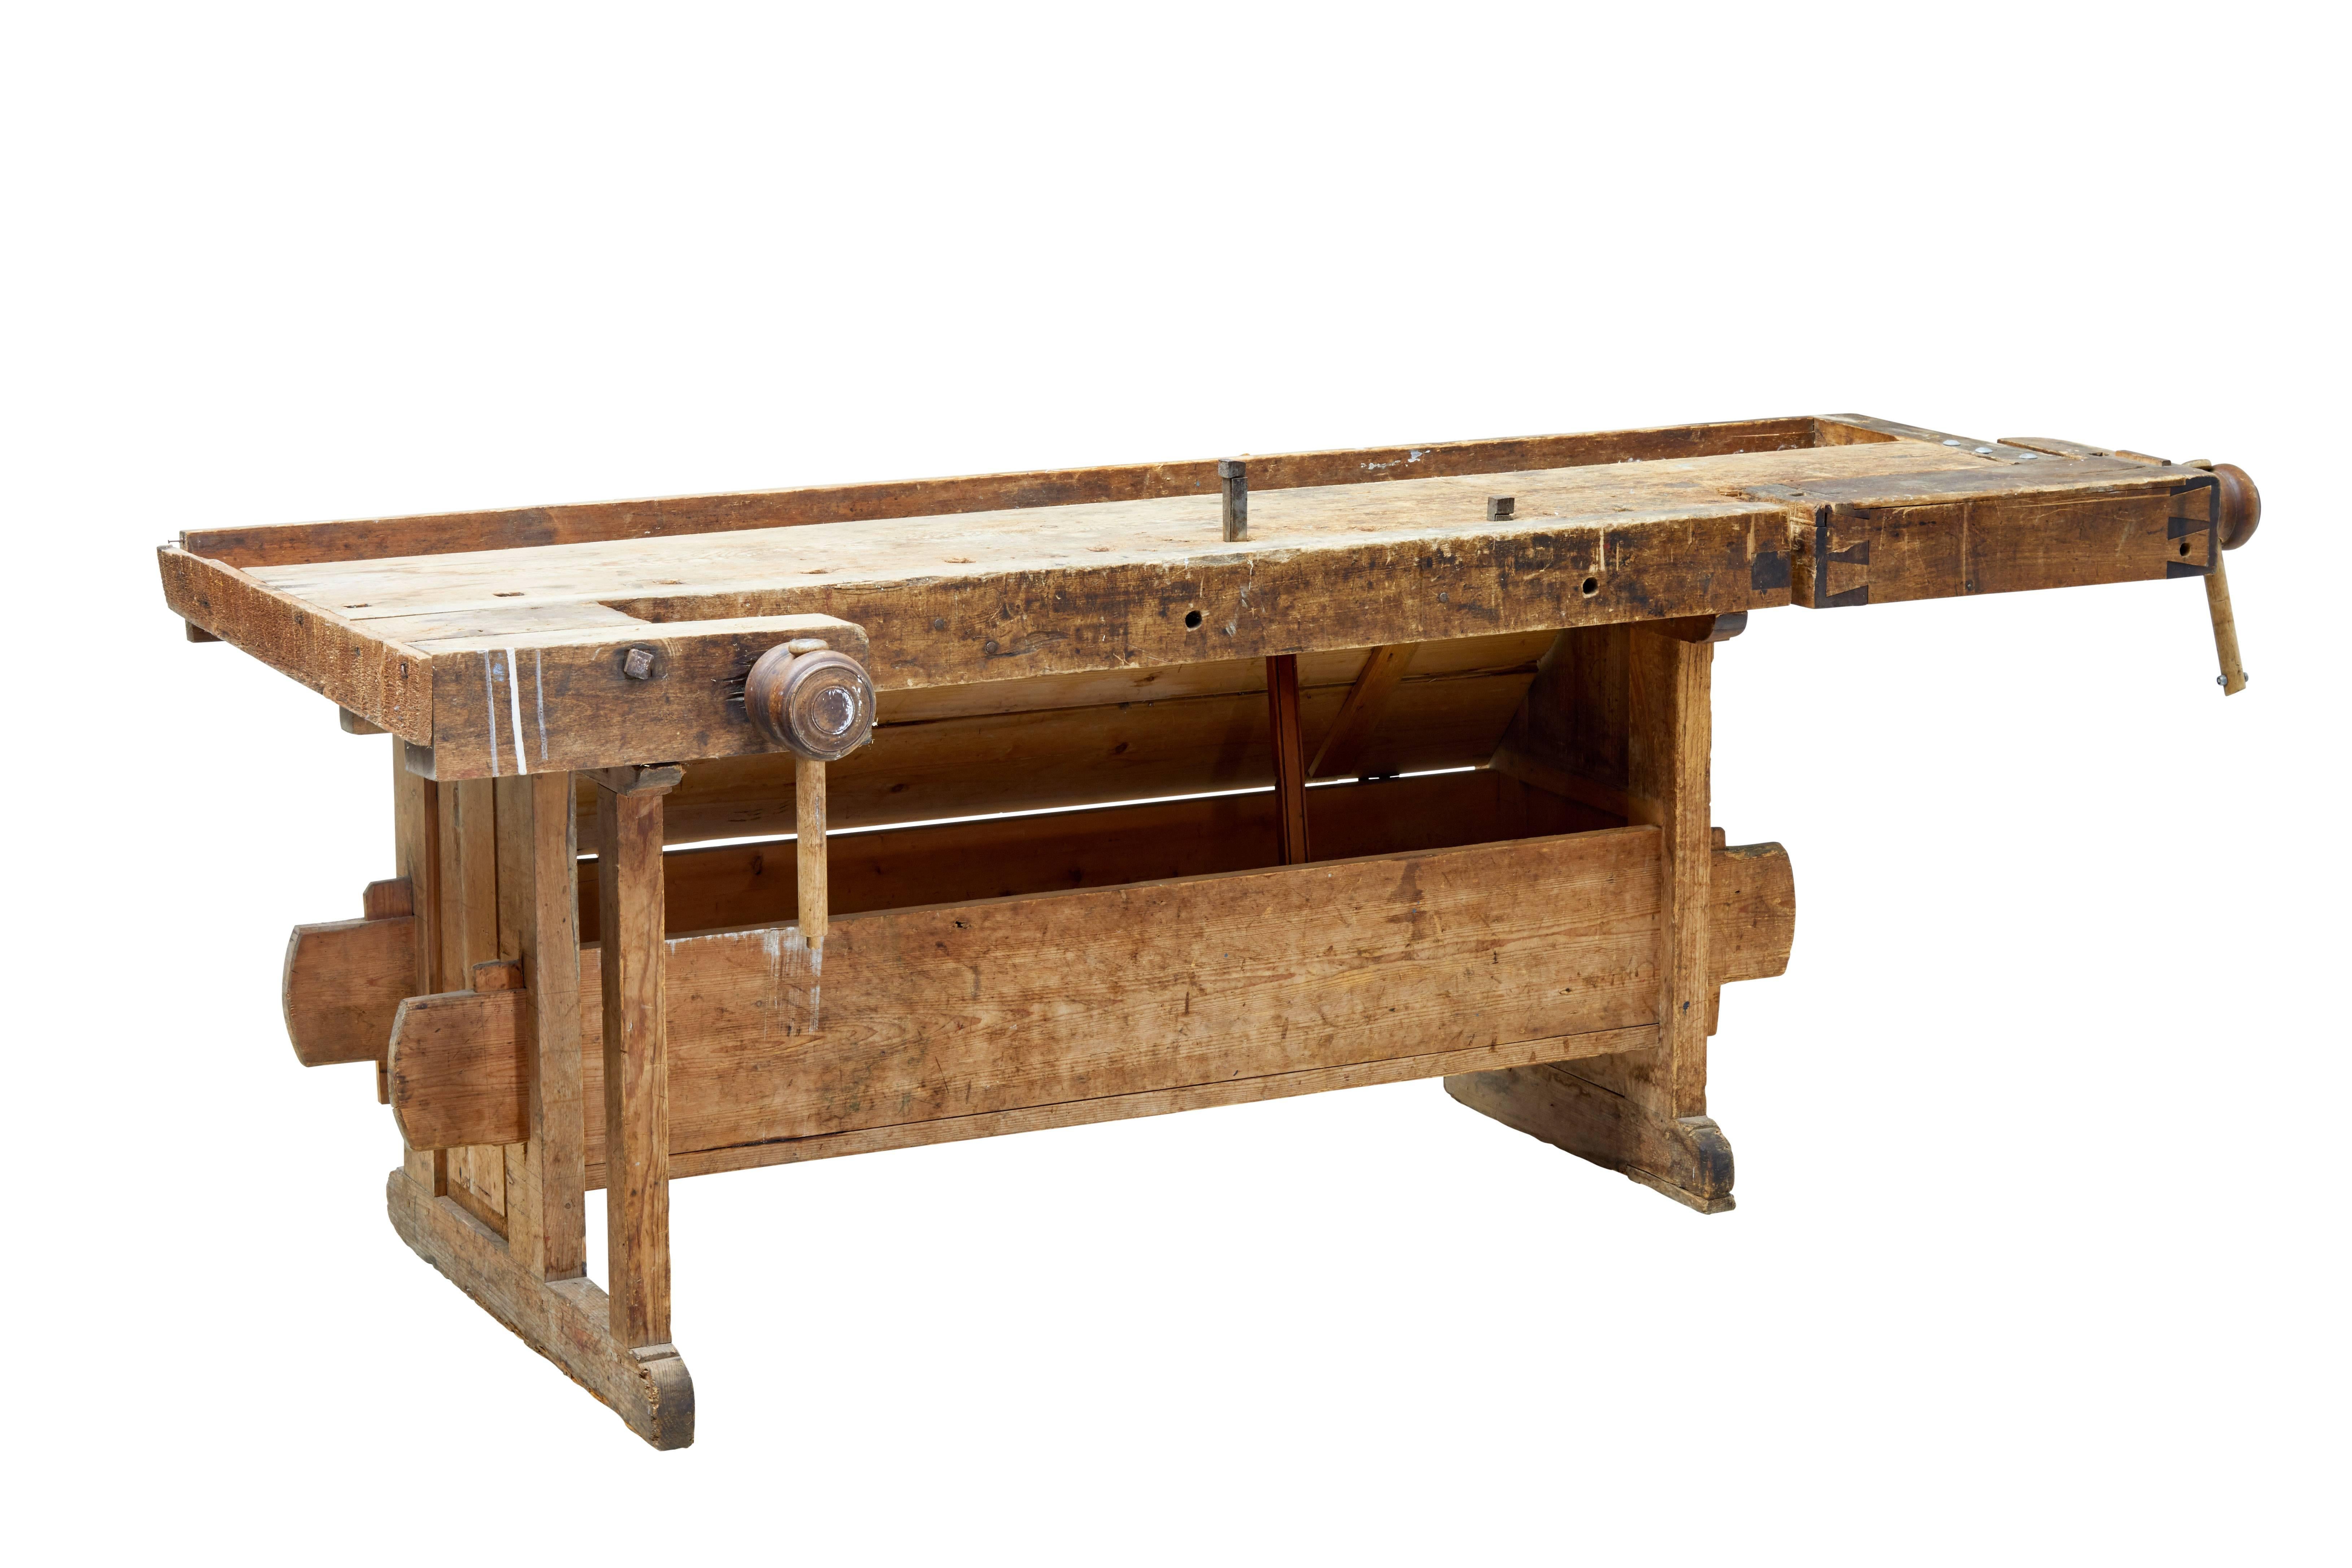 Here we offer a fine 19th century Swedish pine work bench, circa 1880.

Working double clamp on one end, and a threaded clamp to the front.

Obvious signs of use, but fully functional. Standing on trestle legs united by stretchers and held in